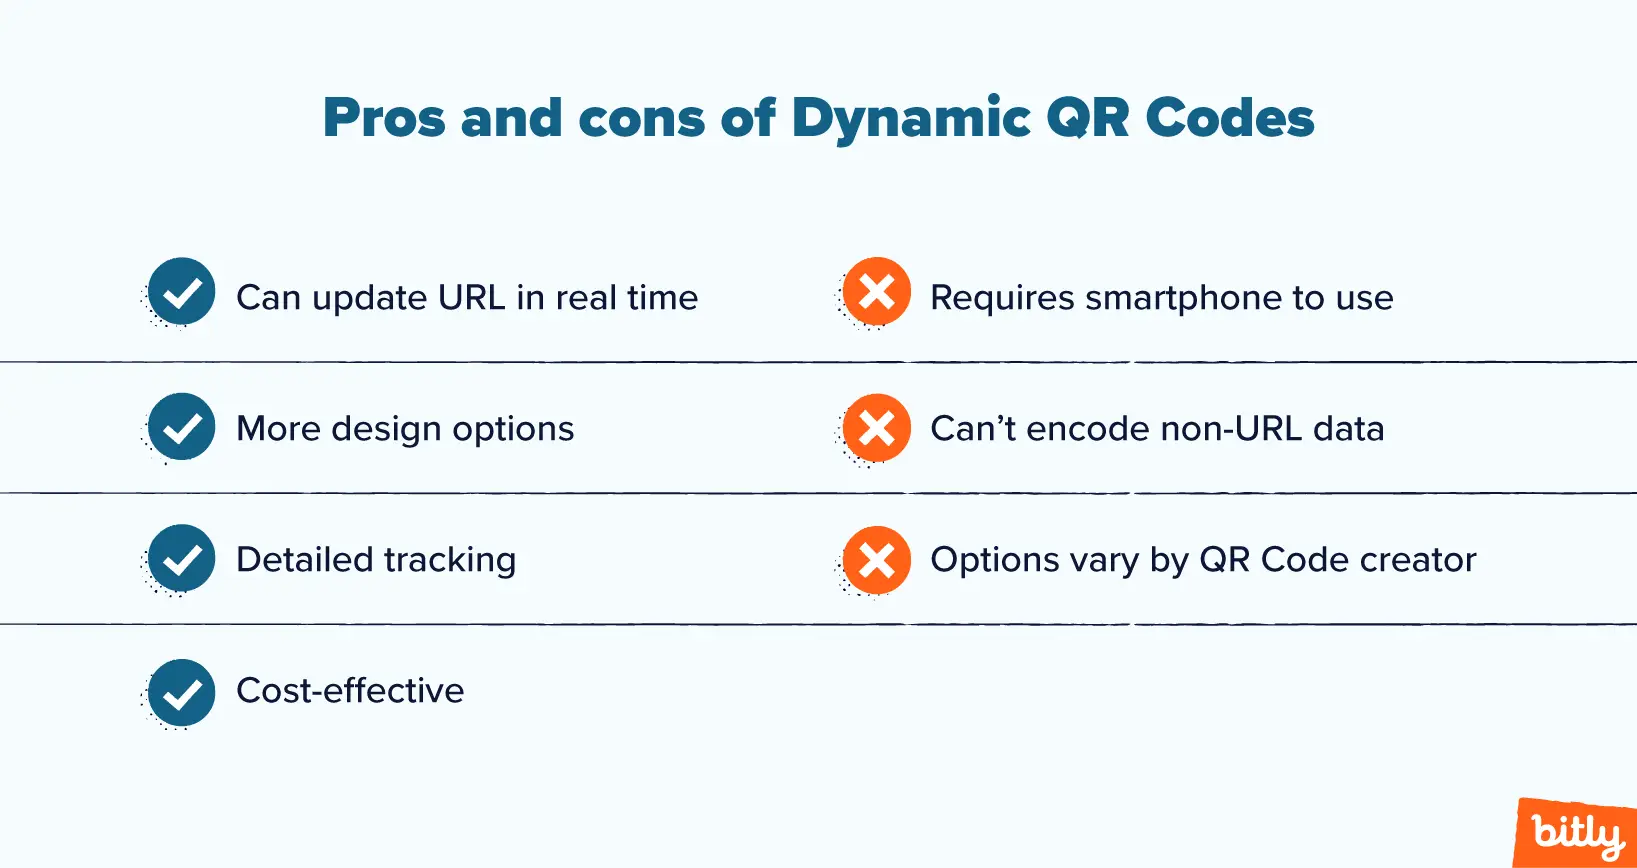 A pros and cons list of Dynamic QR Codes.